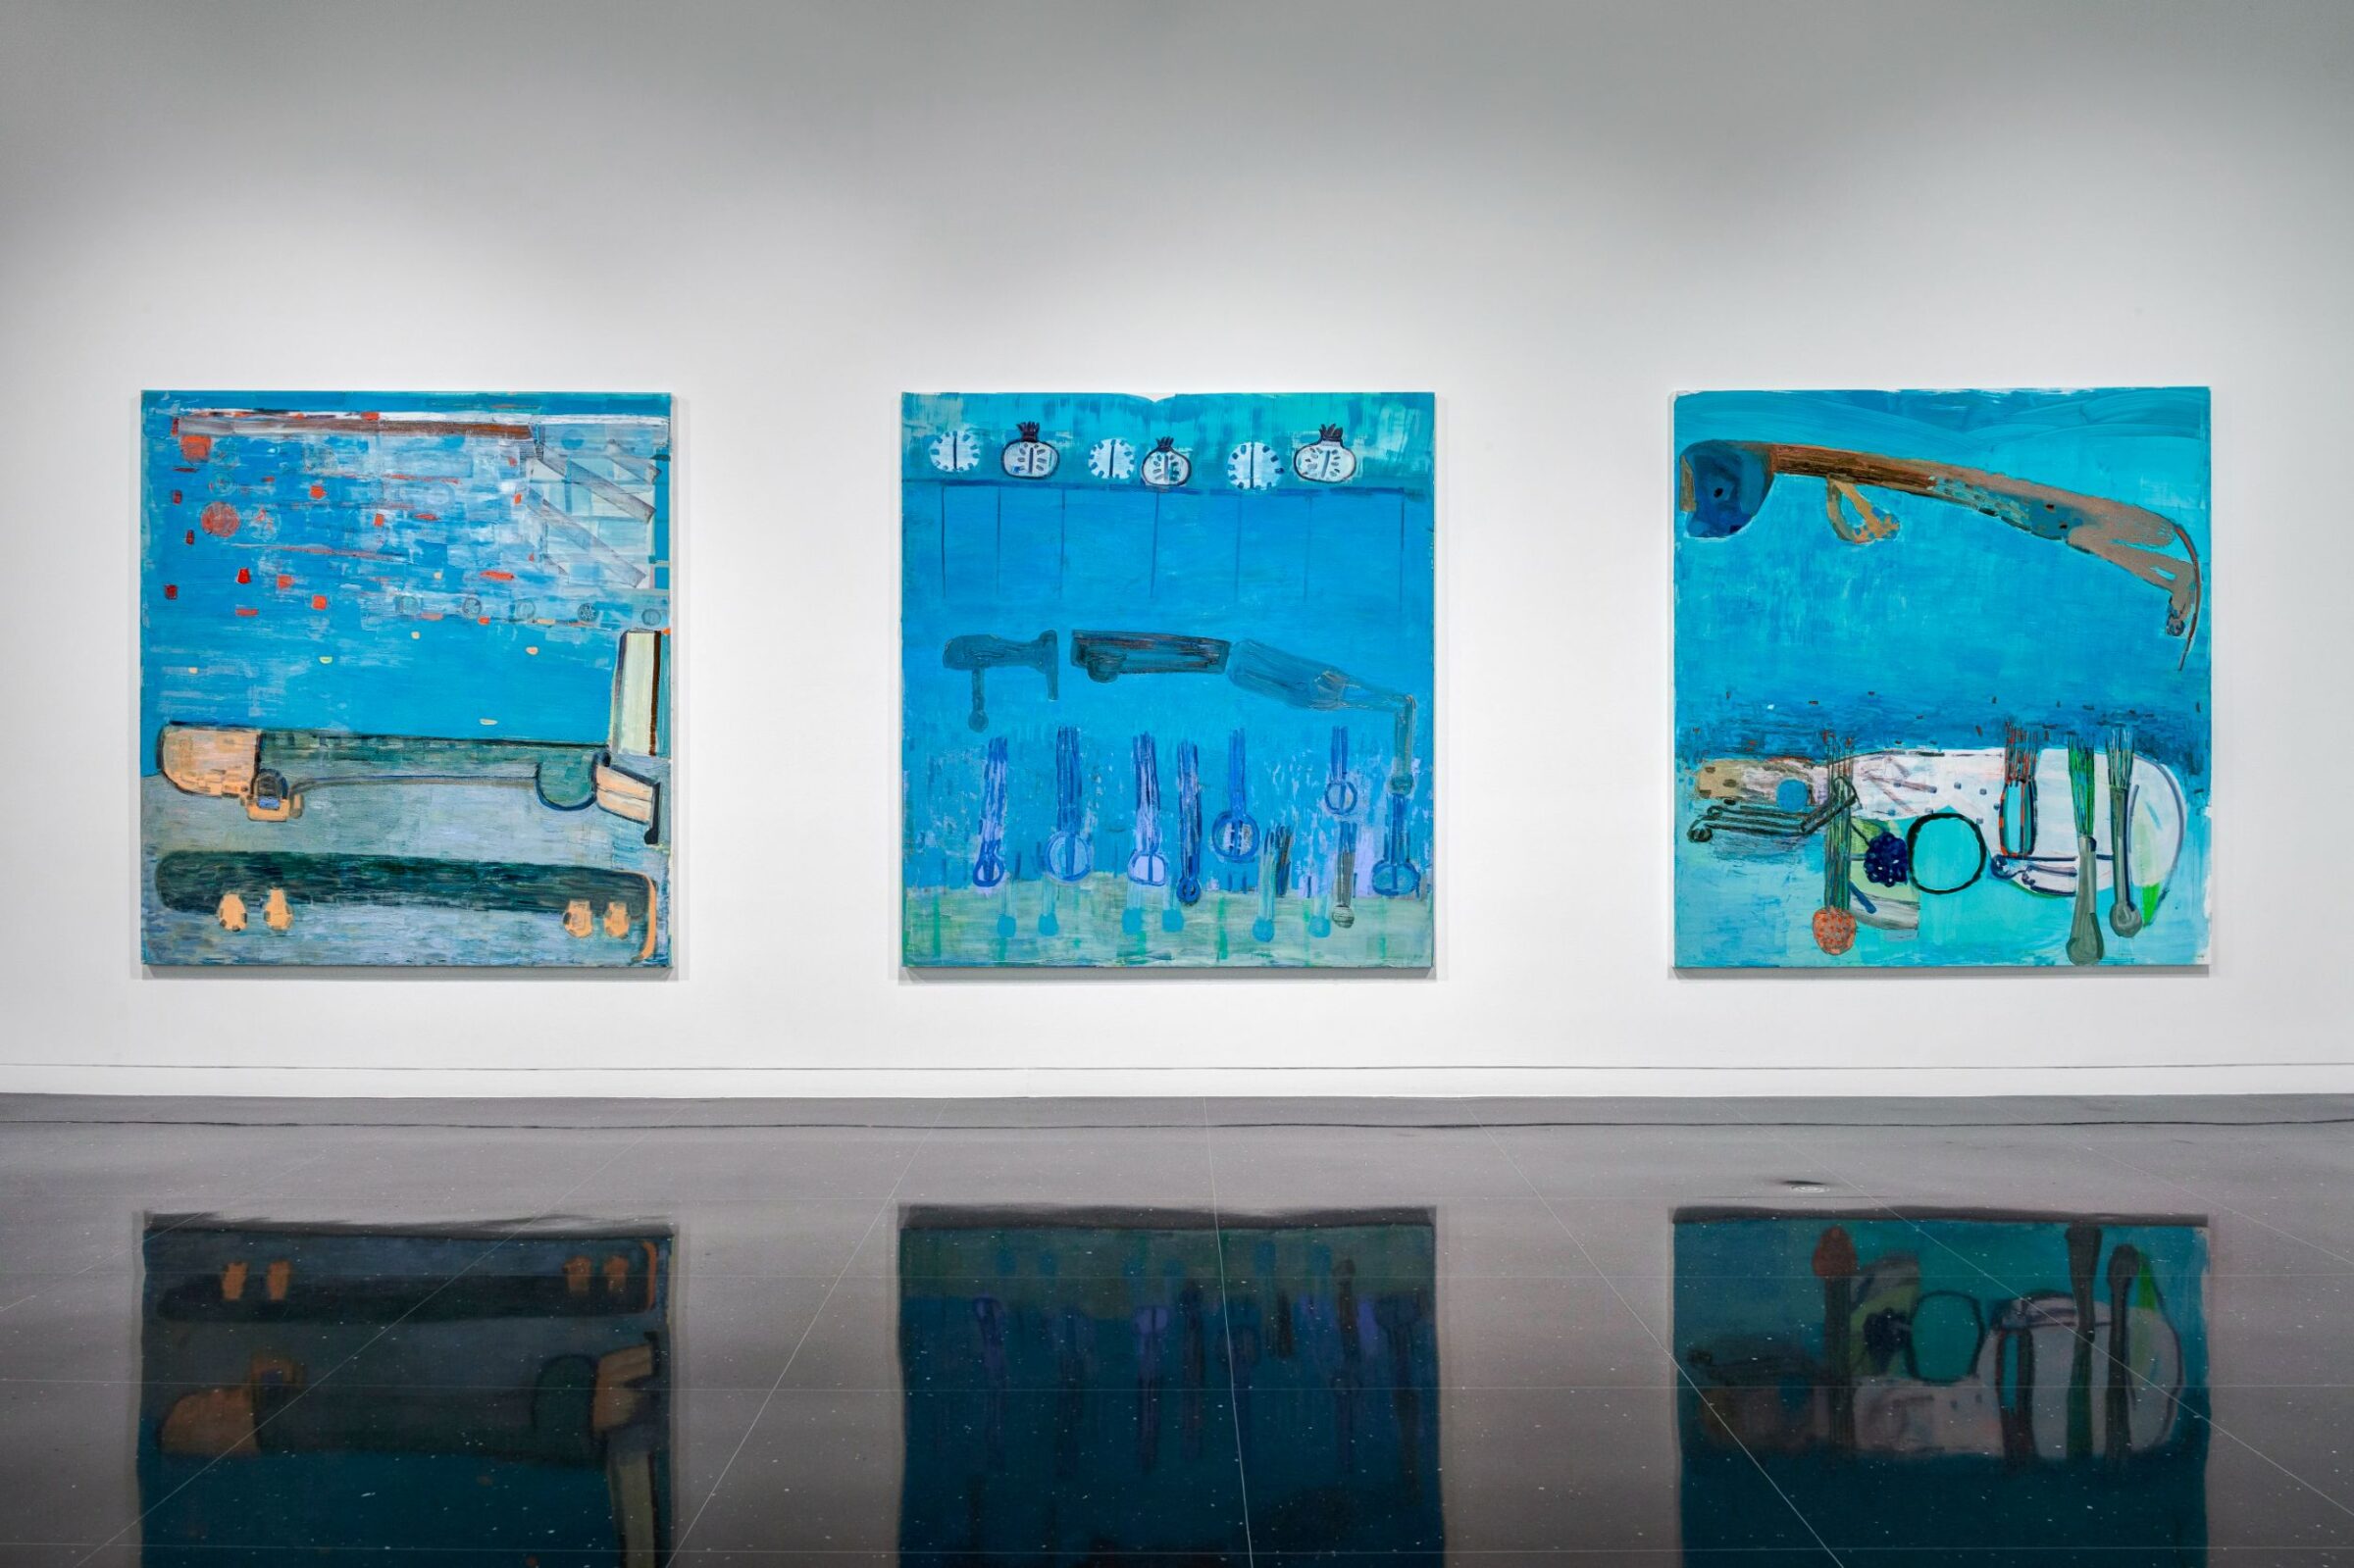 Three large, square blue paintings hanging in alignment on a white gallery wall. Each painting depicts an abstracted landscape.